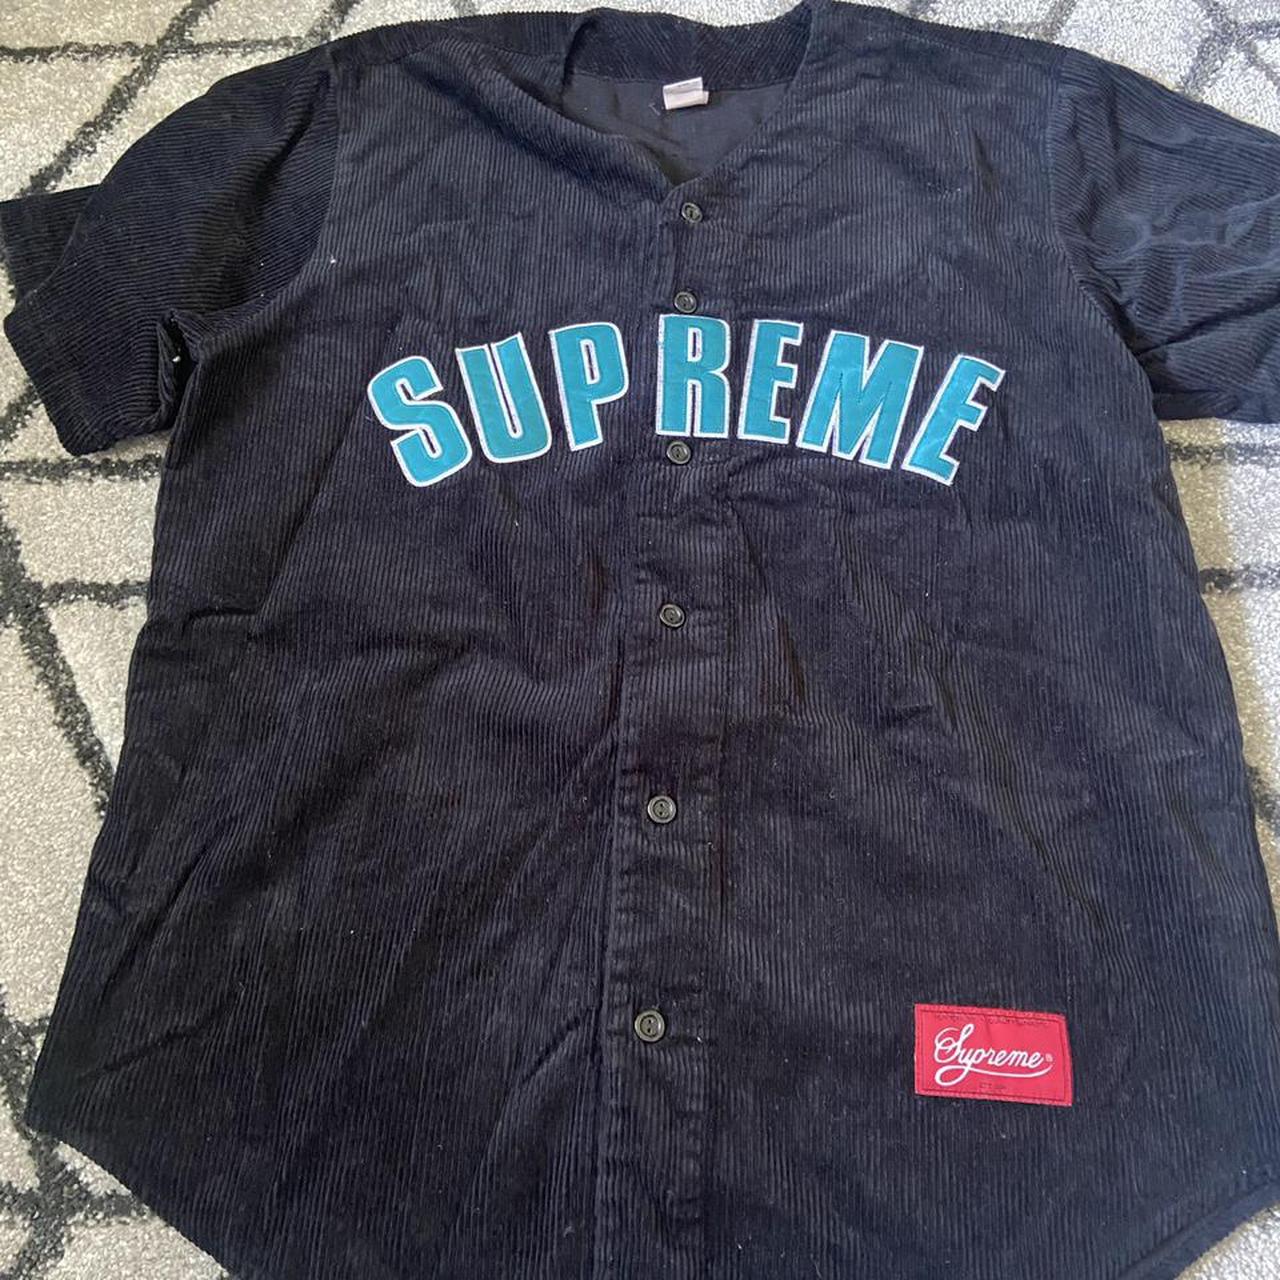 Supreme corduroy baseball tee from SS18 in no rush - Depop